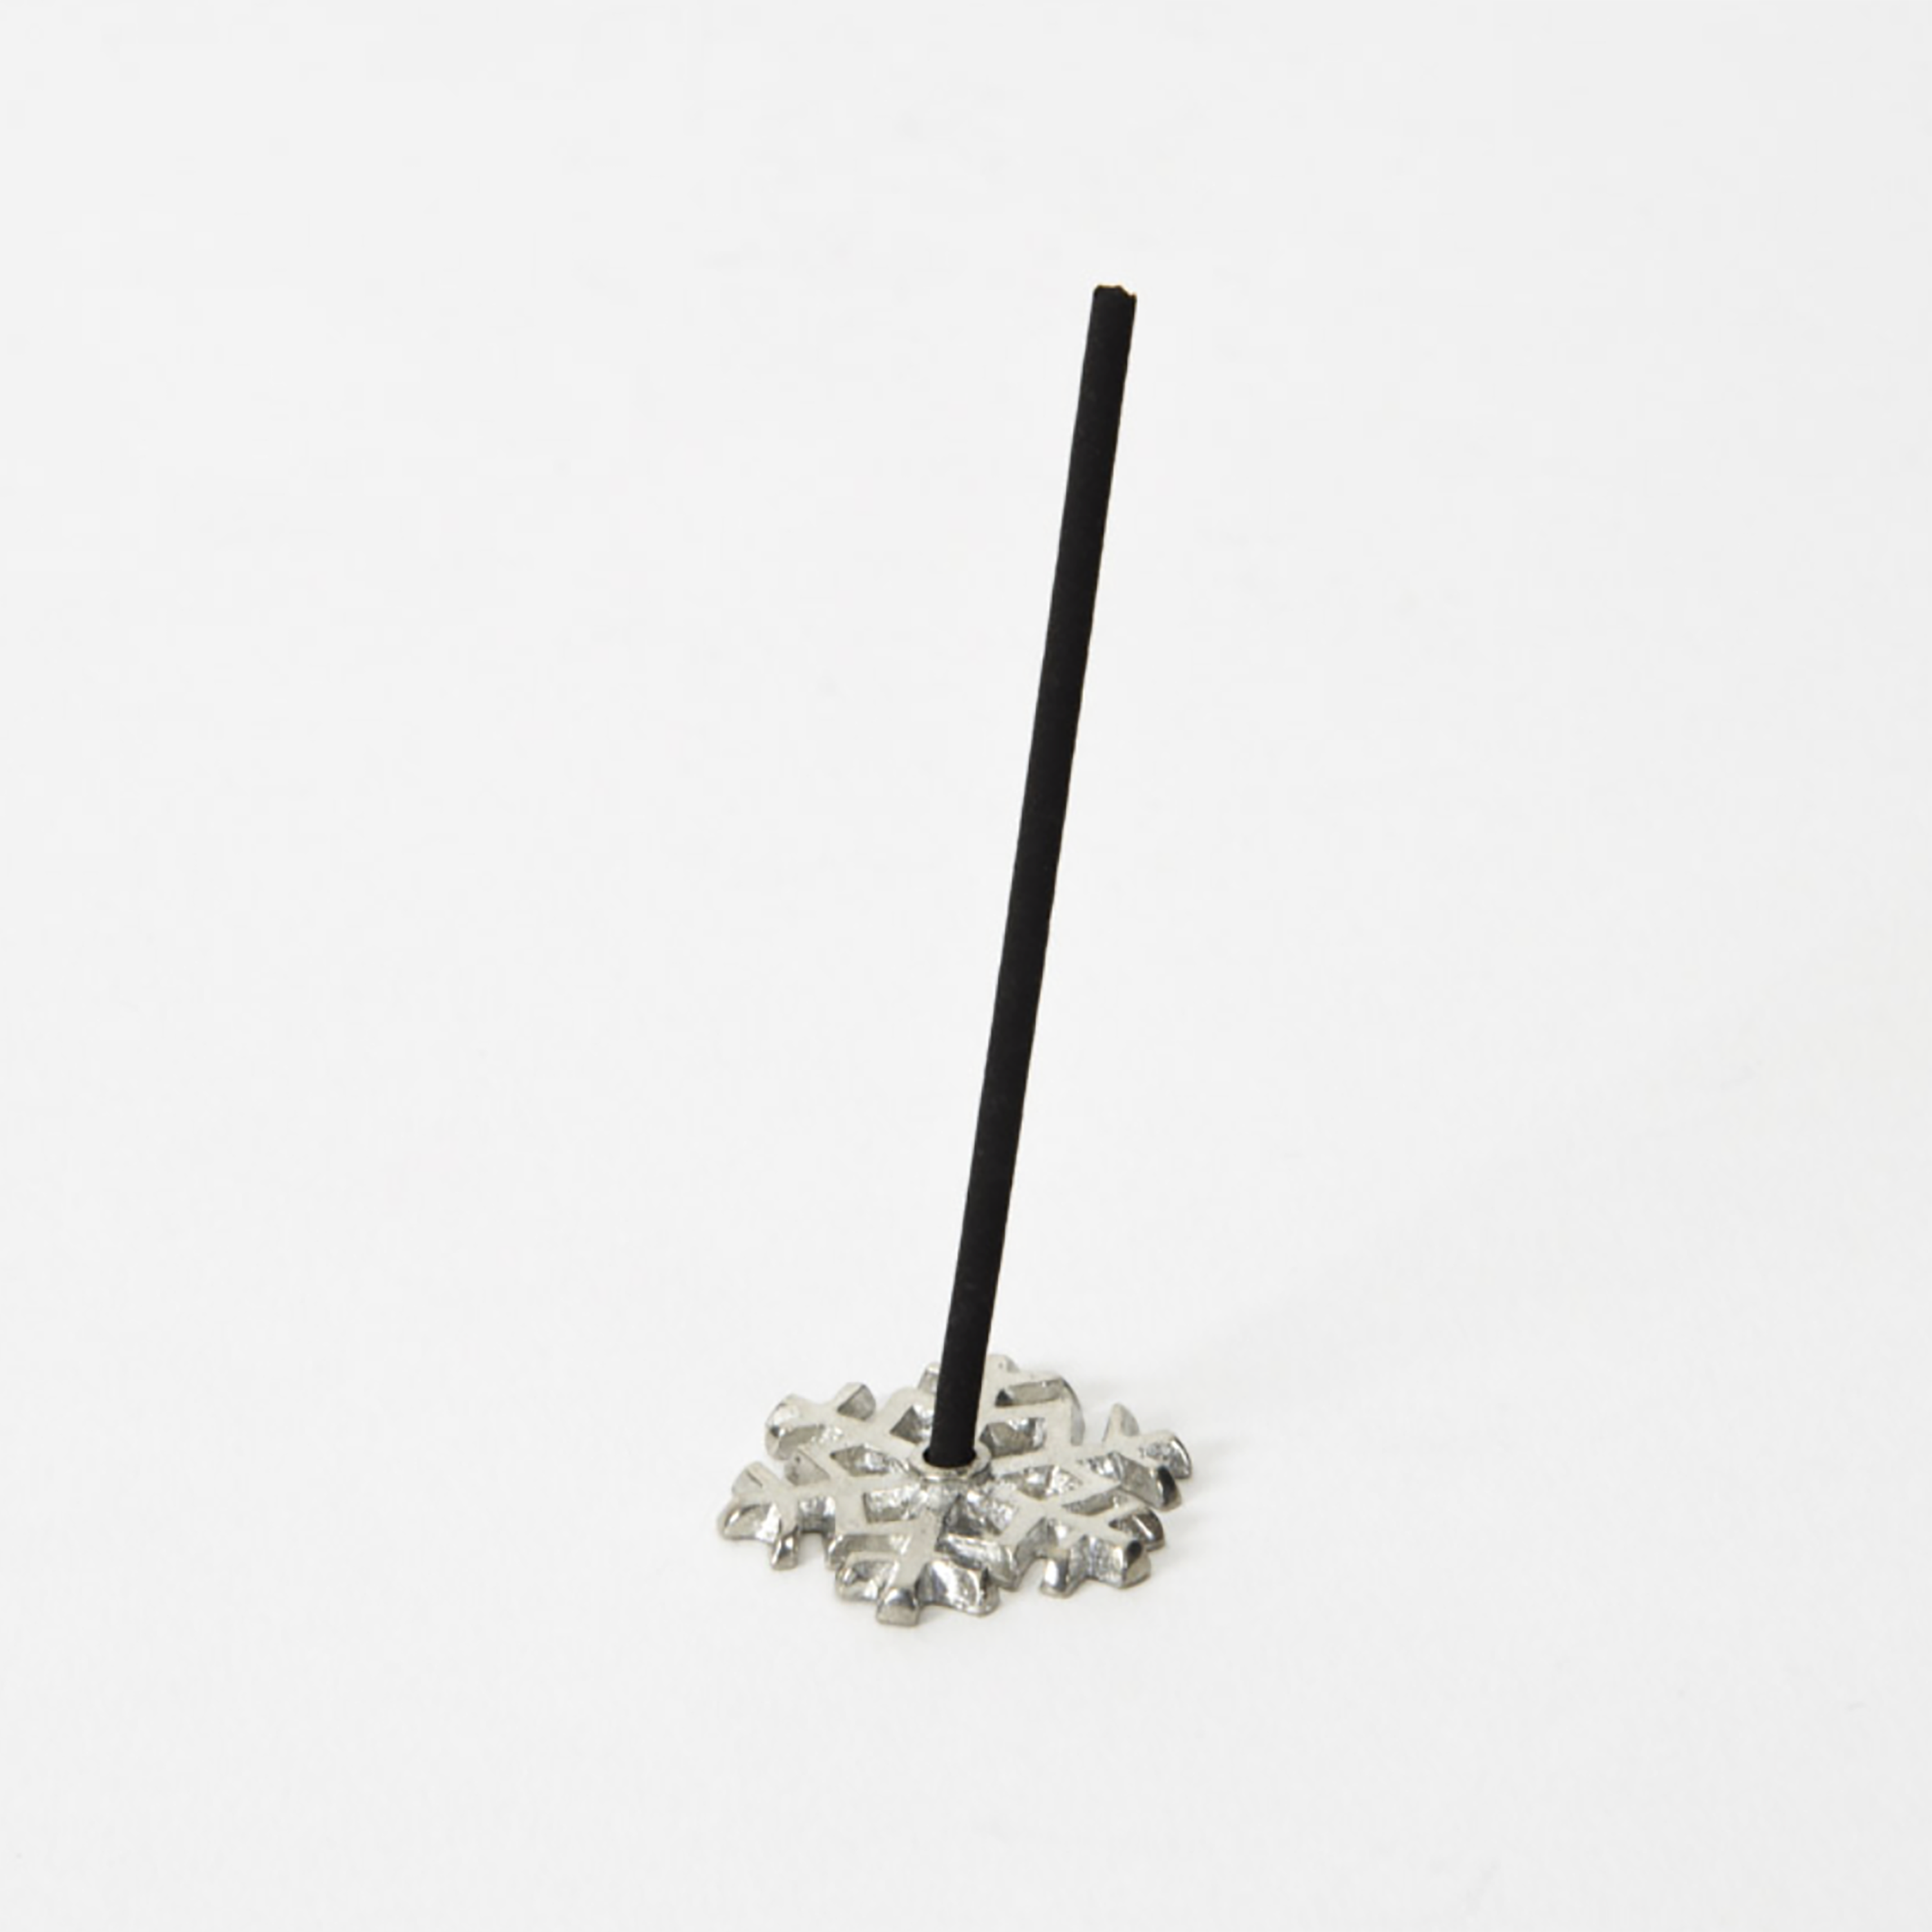 Snowflake Incense Stick Holder from Japan